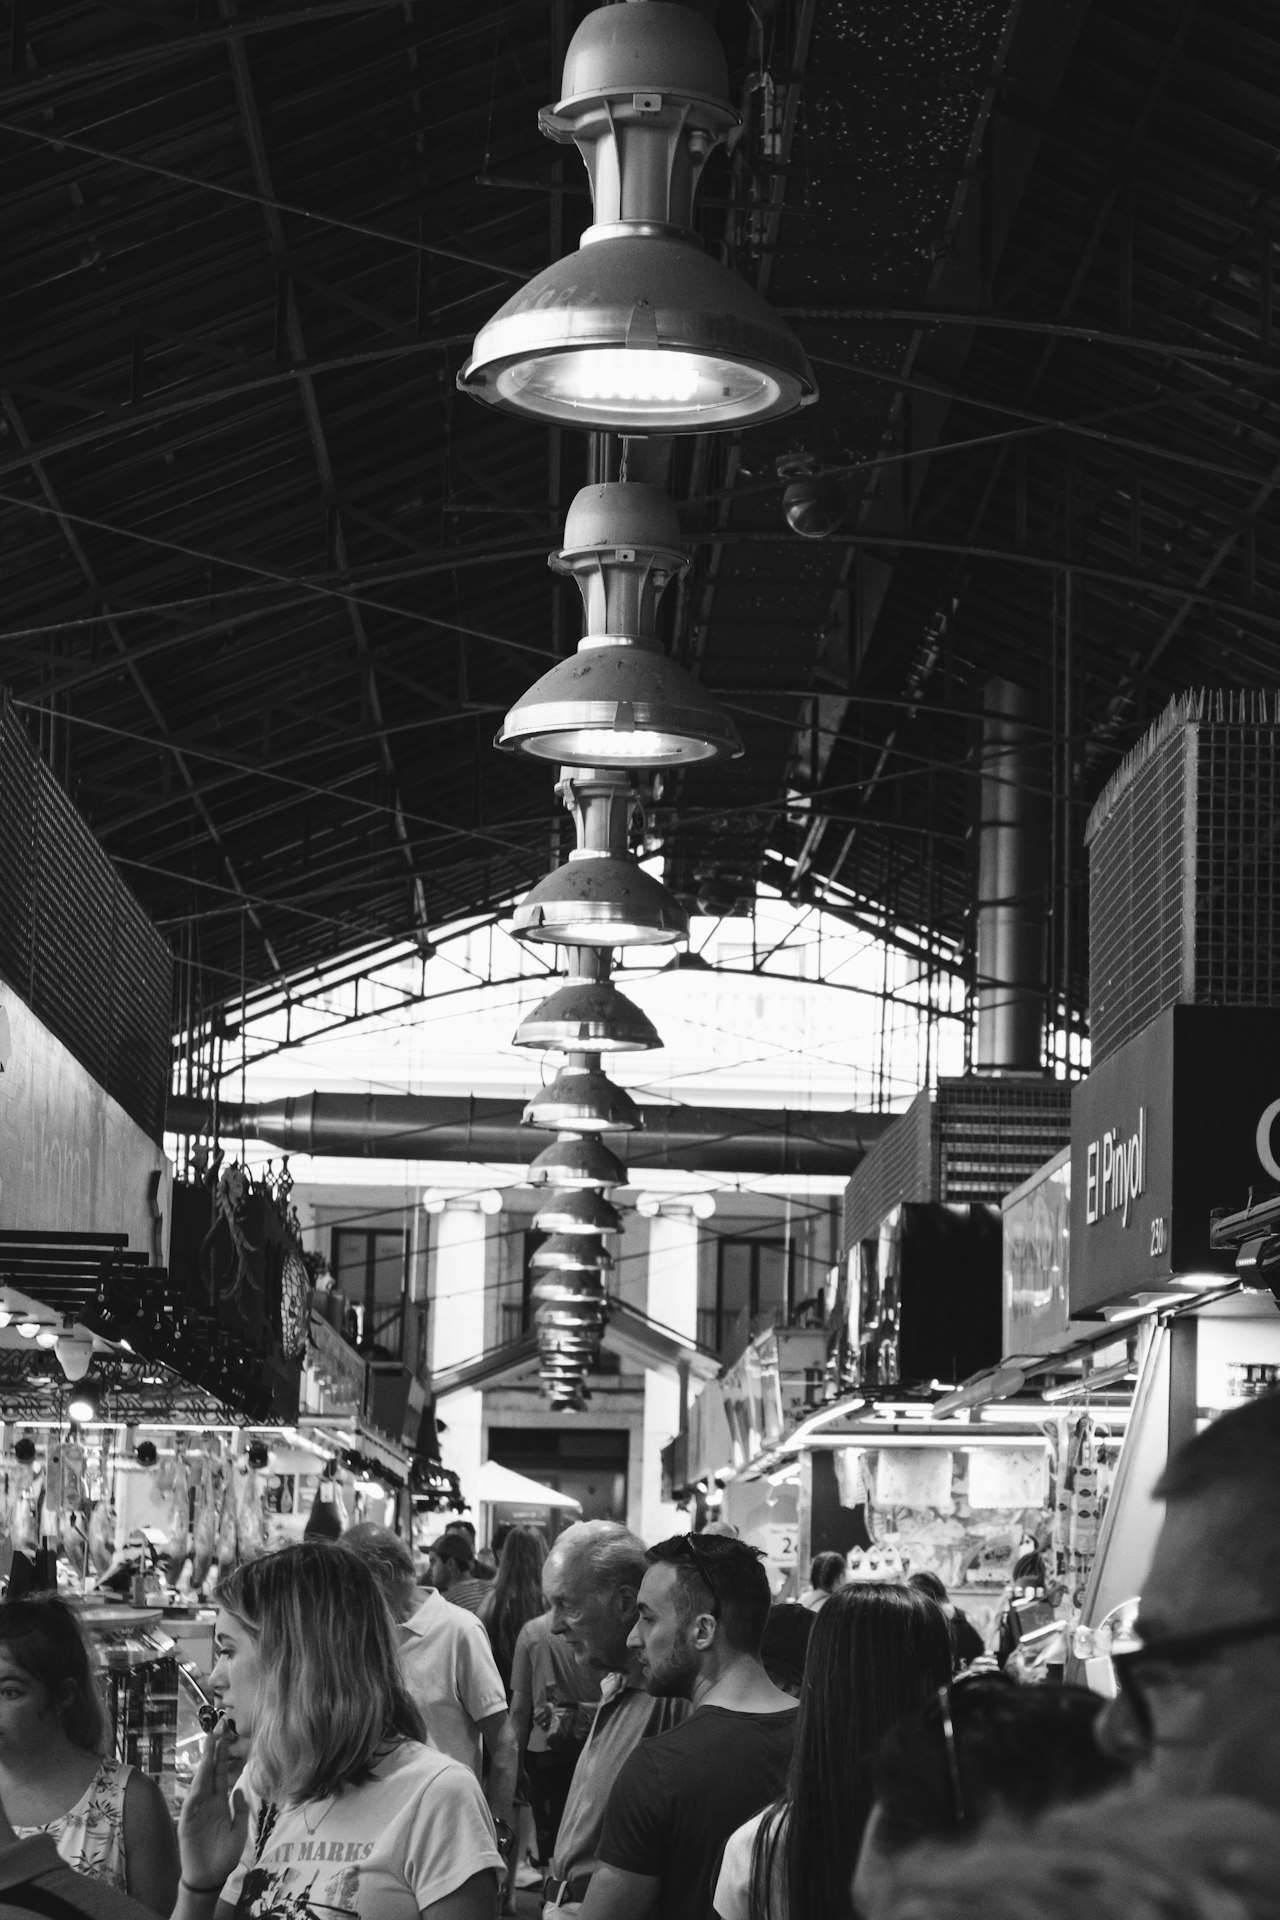 La boqueria crowd of people in a large room with a large chandelier